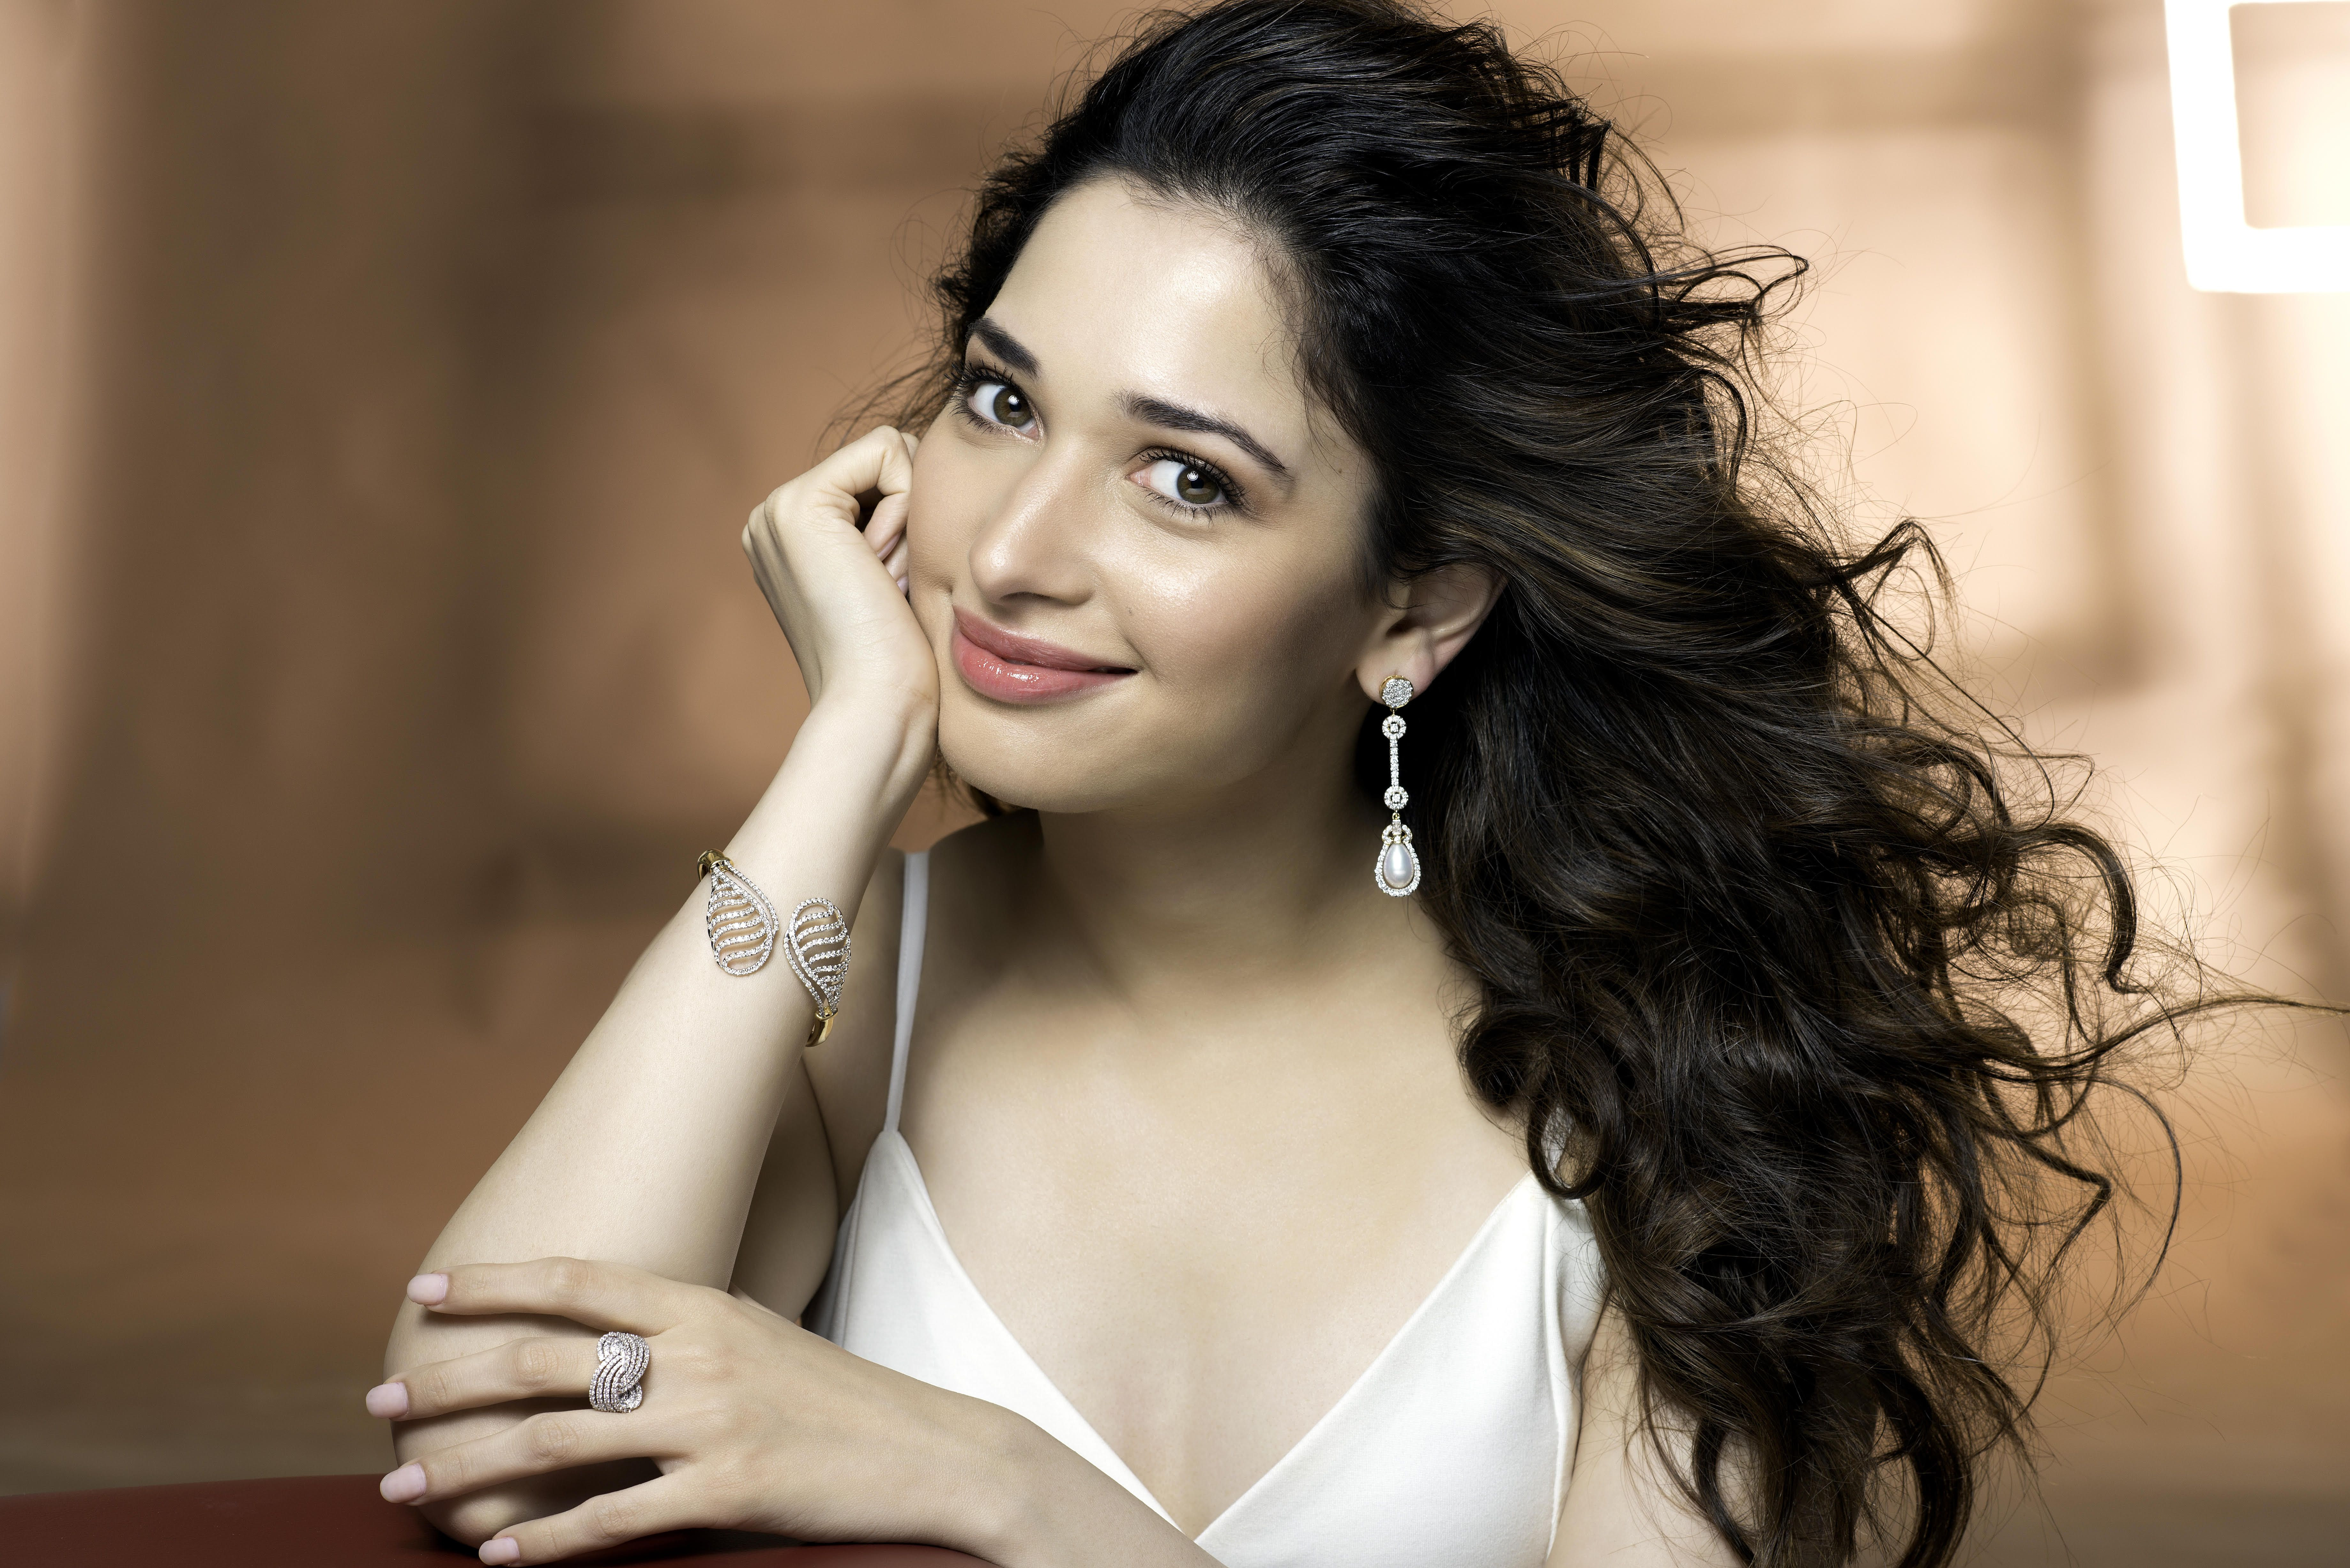 7360px x 4912px - Tamanna Bhatia [7360 x 4912]- High Quality Picture - Ultra HQ